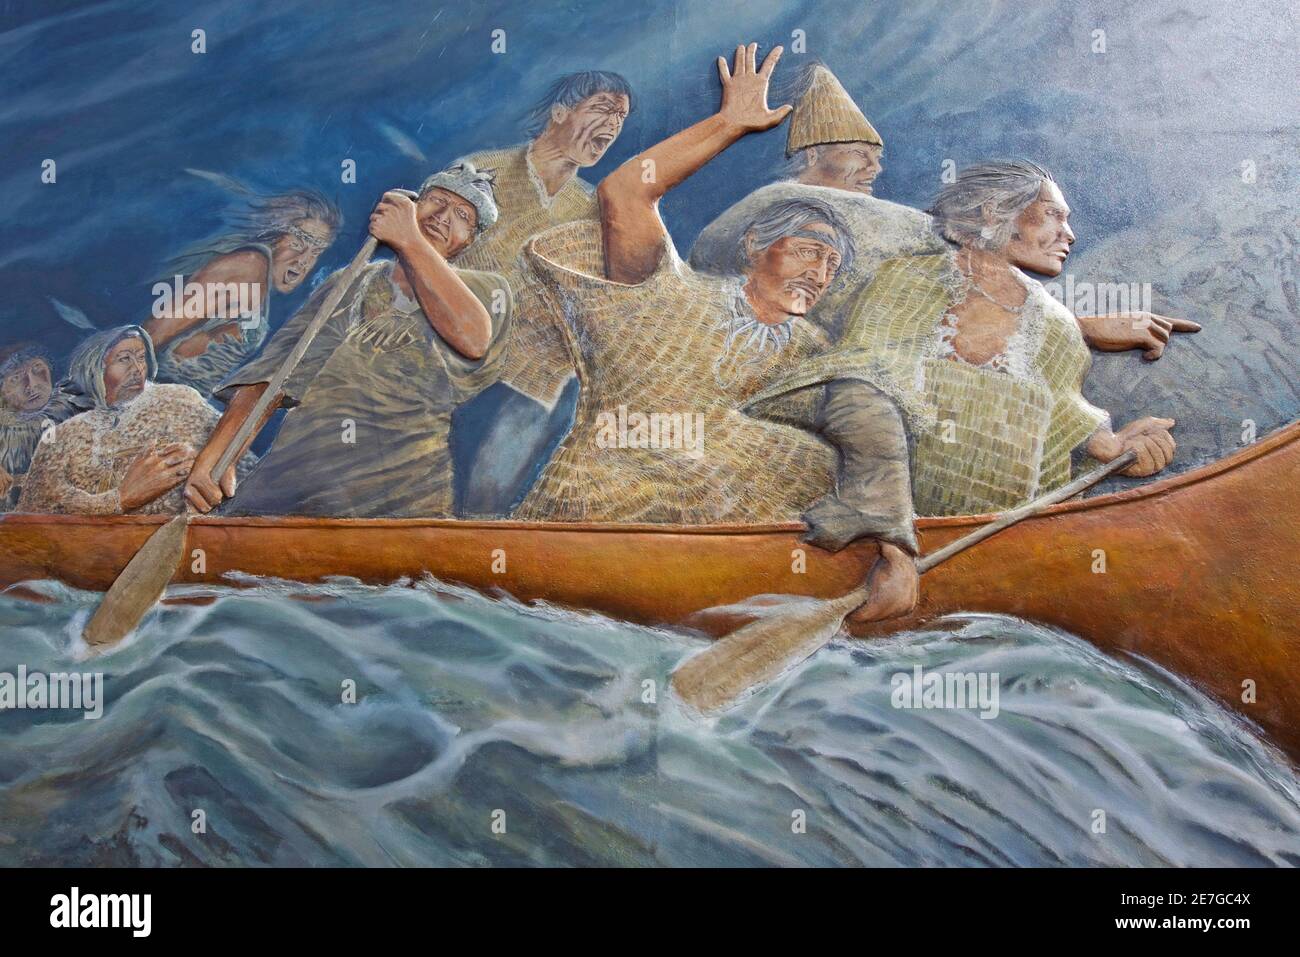 Wall art on a building in Chemainus depictiong fist nation pioneering settlers arriving in their new lands on Vancouver Island. Stock Photo